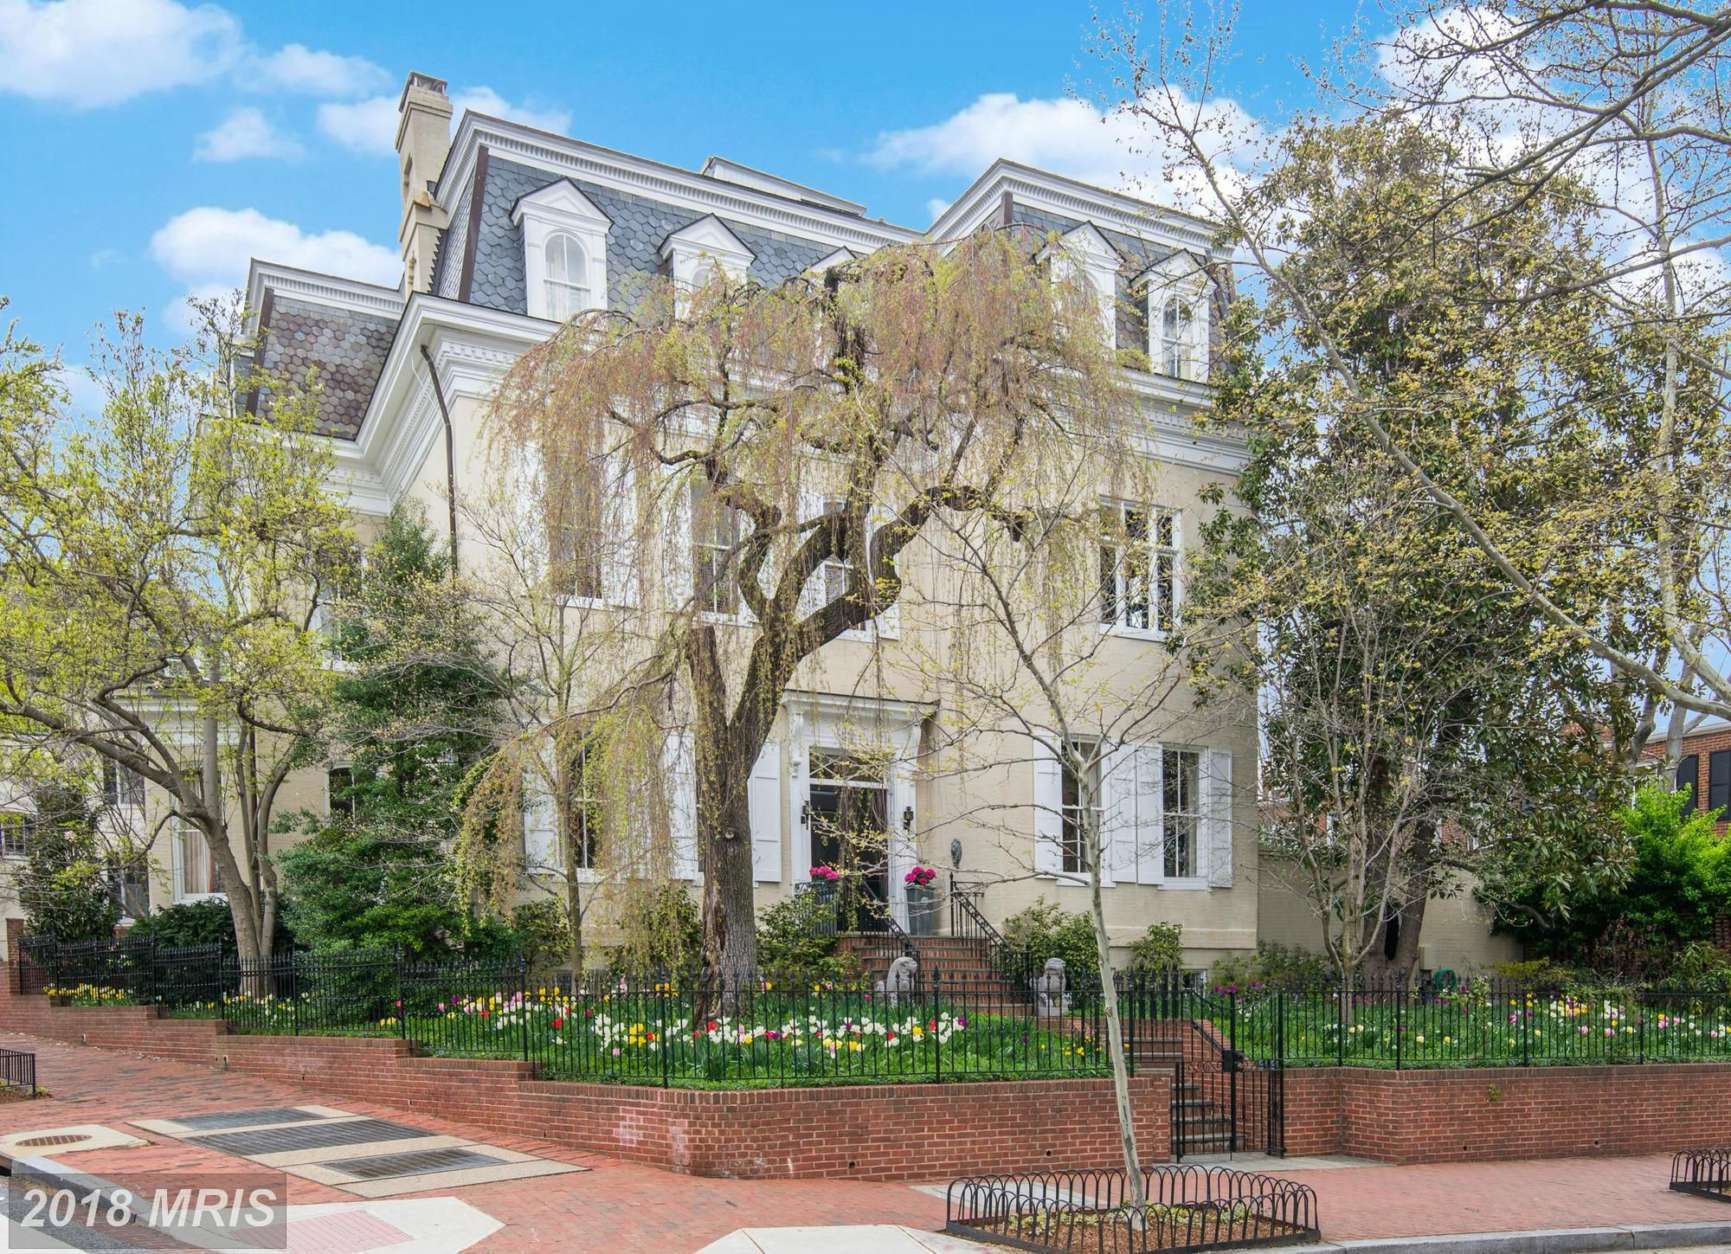 1. $7,365,000
3053 P Street Northwest
Washington, D.C. 
Built in 1875, this Georgetown mansion has eight bathrooms and nine bedrooms. 
(Courtesy Bright MLS) 